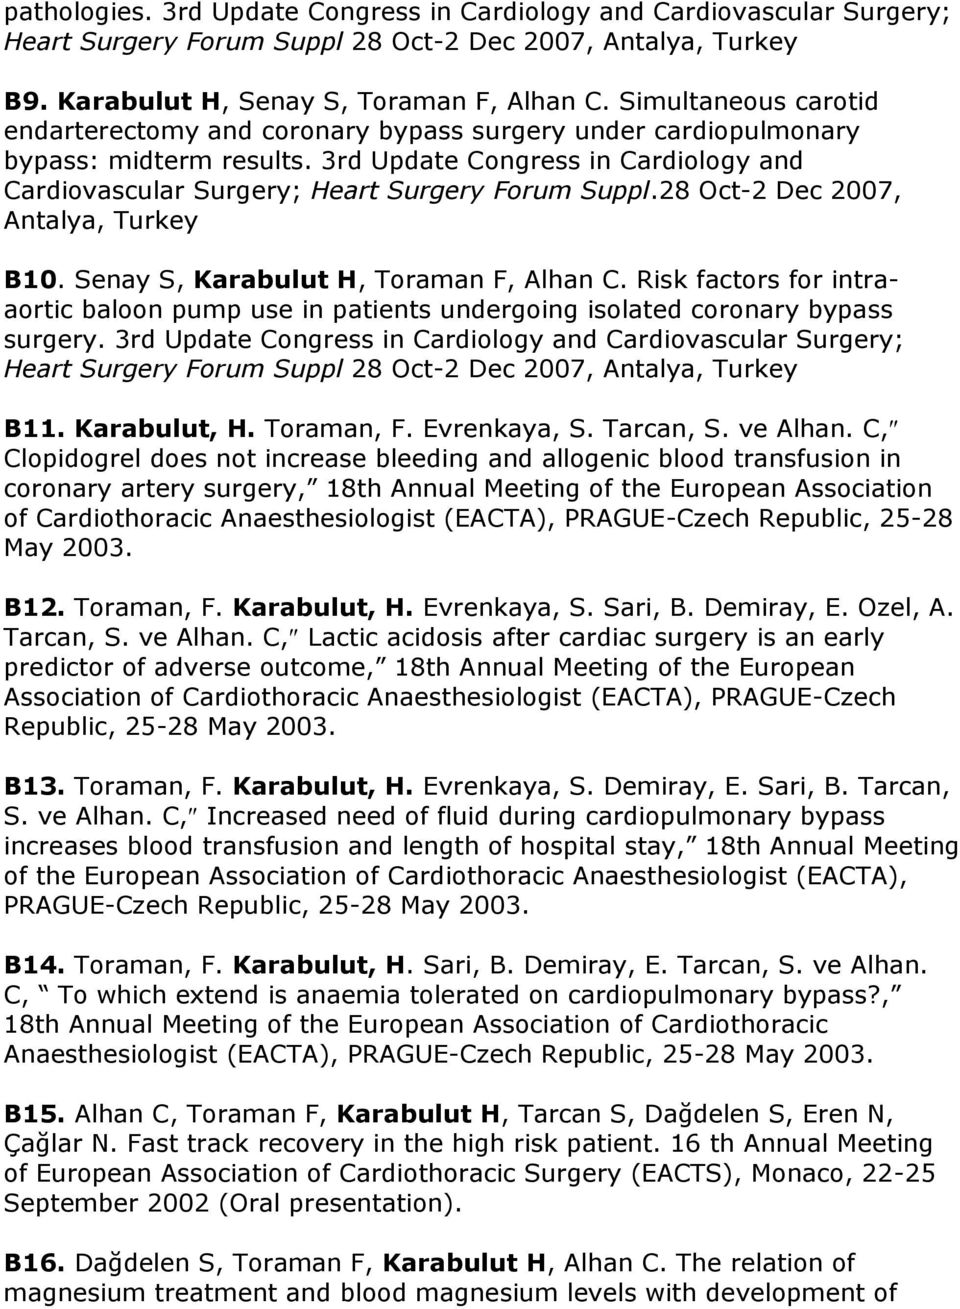 28 Oct-2 Dec 2007, Antalya, Turkey B10. Senay S, Karabulut H, Toraman F, Alhan C. Risk factors for intraaortic baloon pump use in patients undergoing isolated coronary bypass surgery.